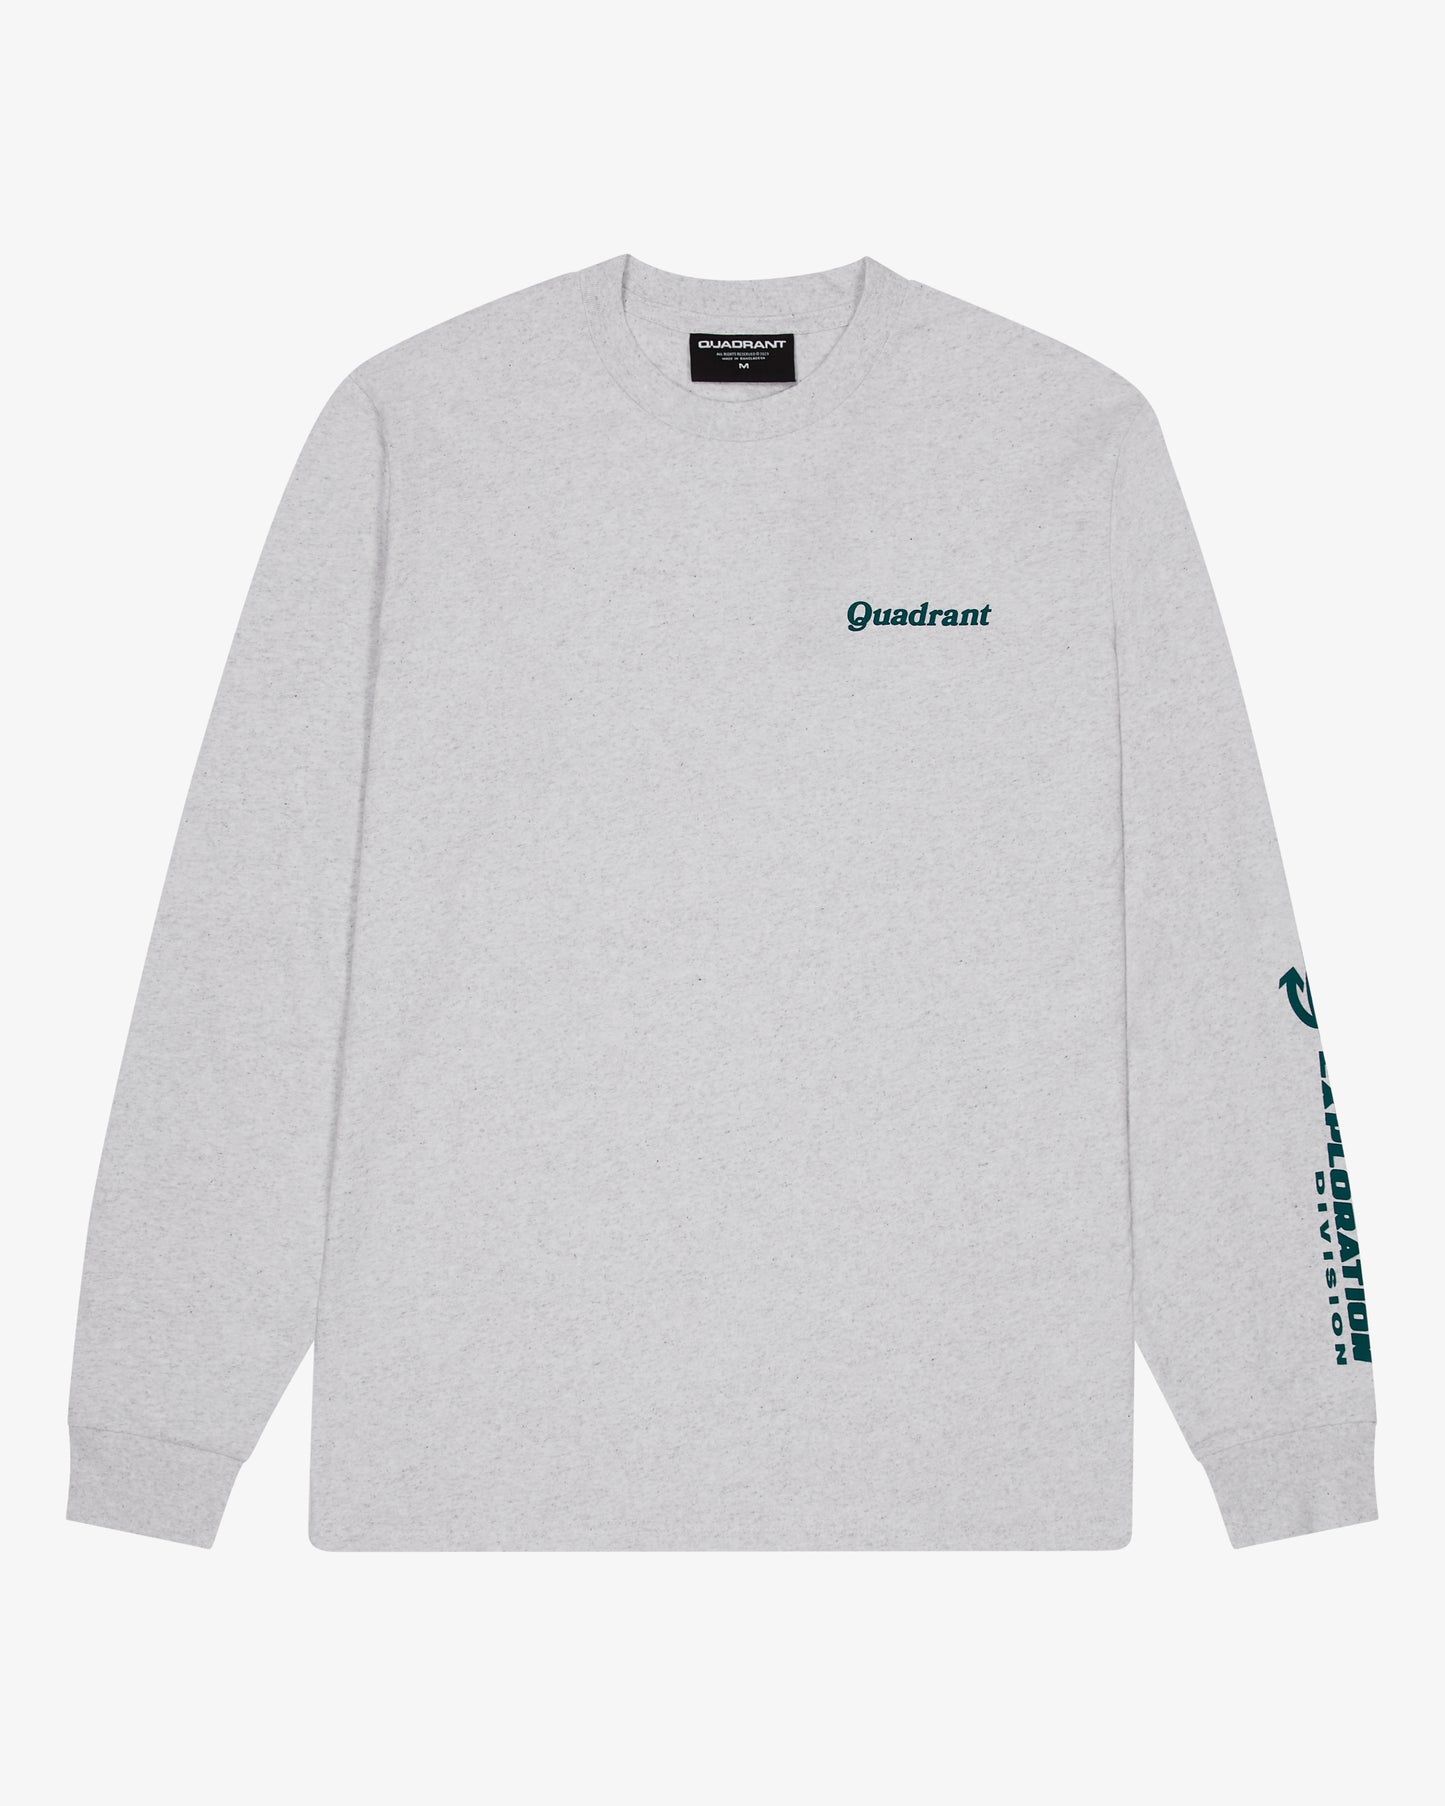 EXPLORATION LONG SLEEVE IN WHITE HEATHER